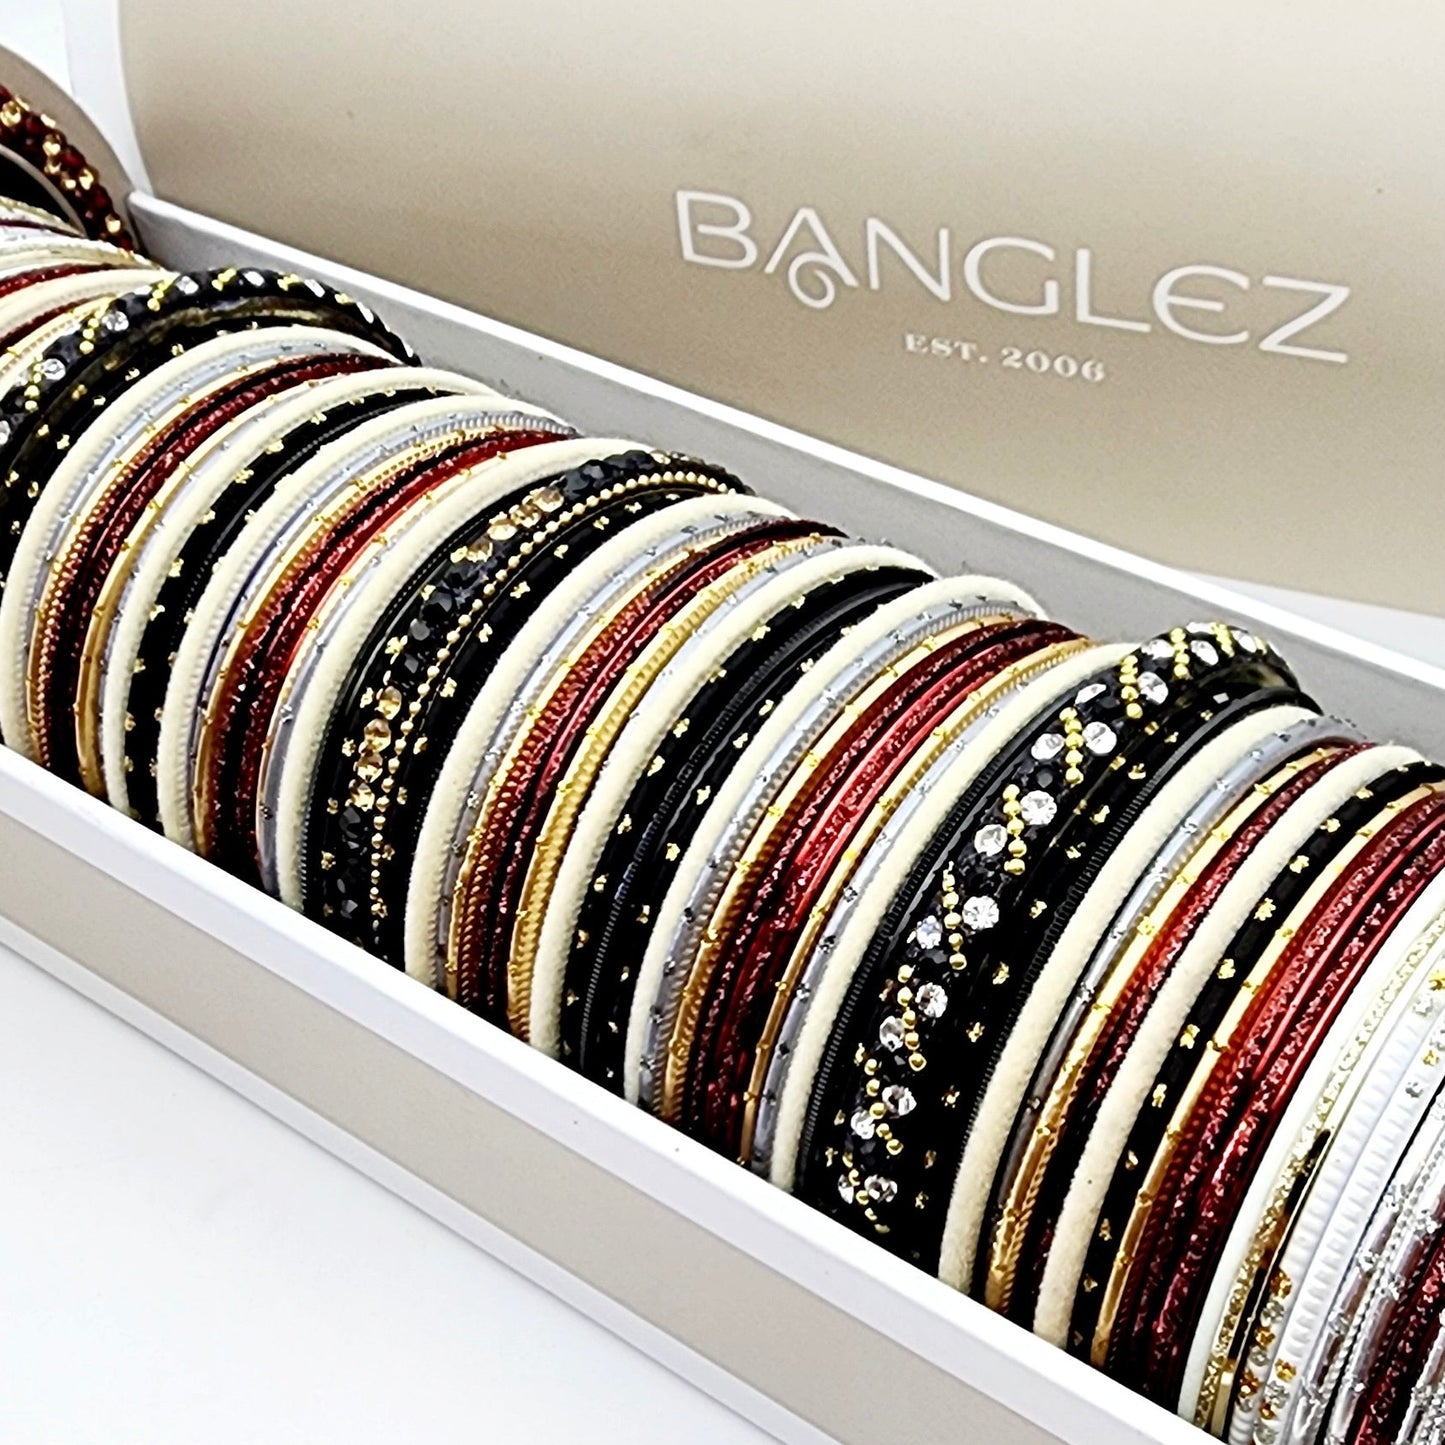 Bailey Banglez Chest Indian Bangles , South Asian Bangles , Pakistani Bangles , Desi Bangles , Punjabi Bangles , Tamil Bangles , Indian Jewelry